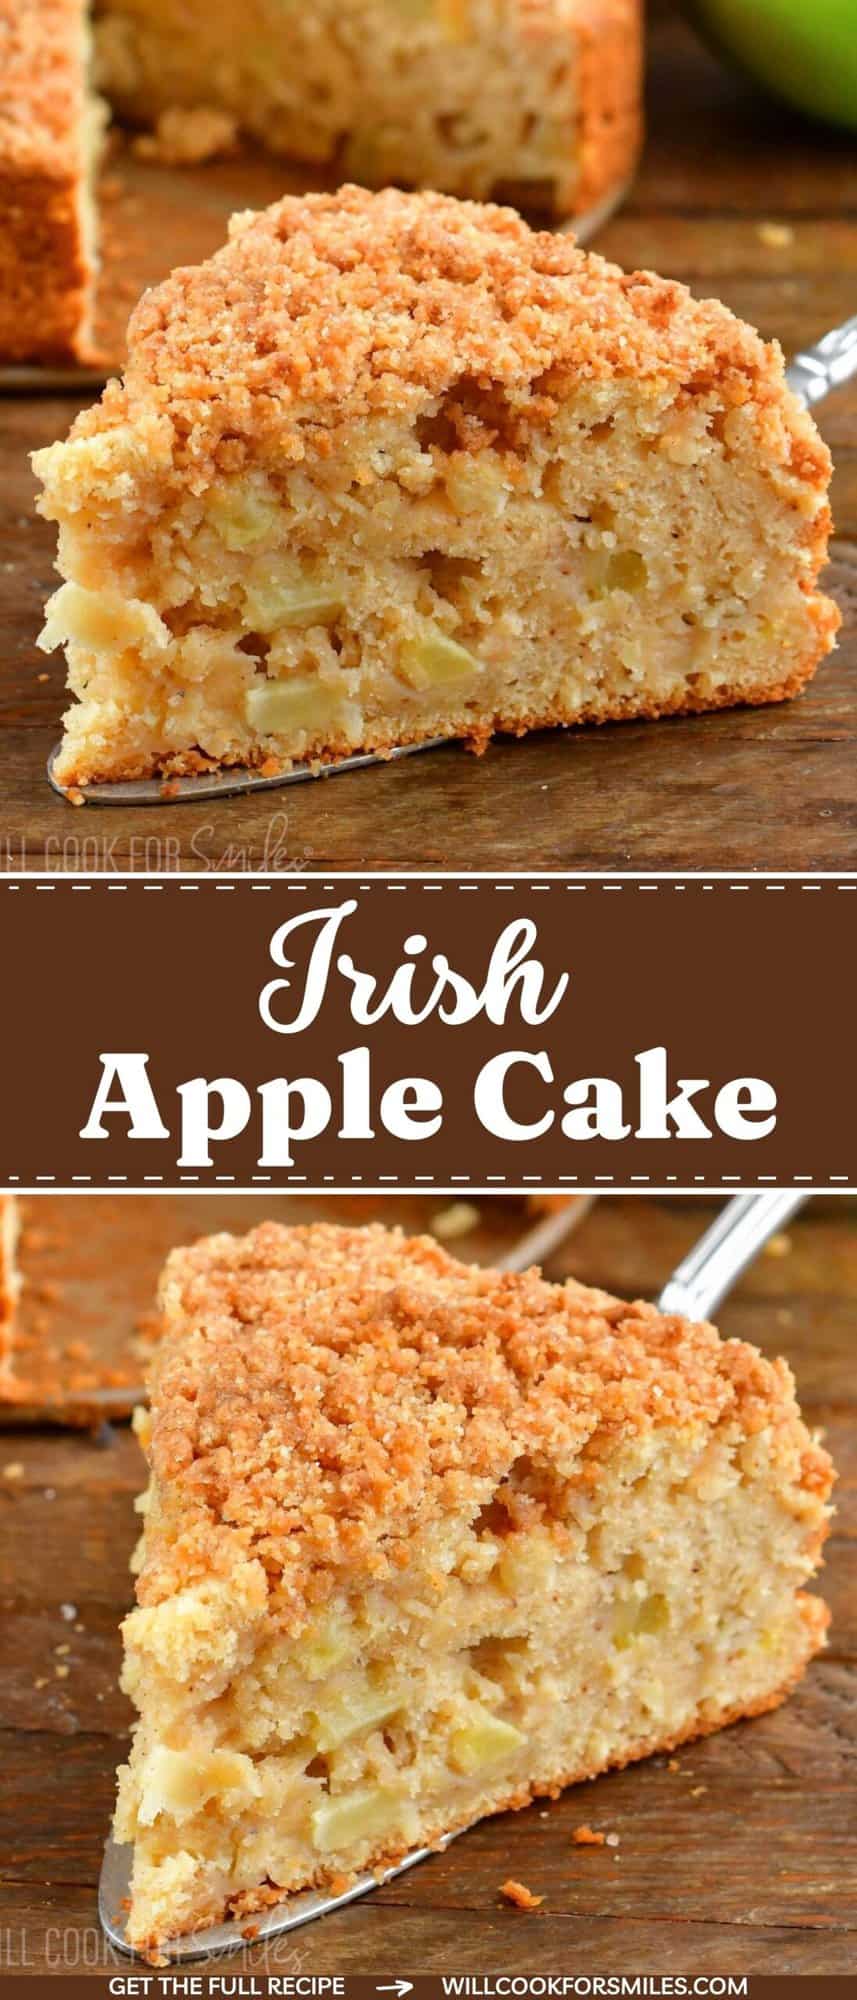 collage of two closeup images of a slice of apple cake and title.